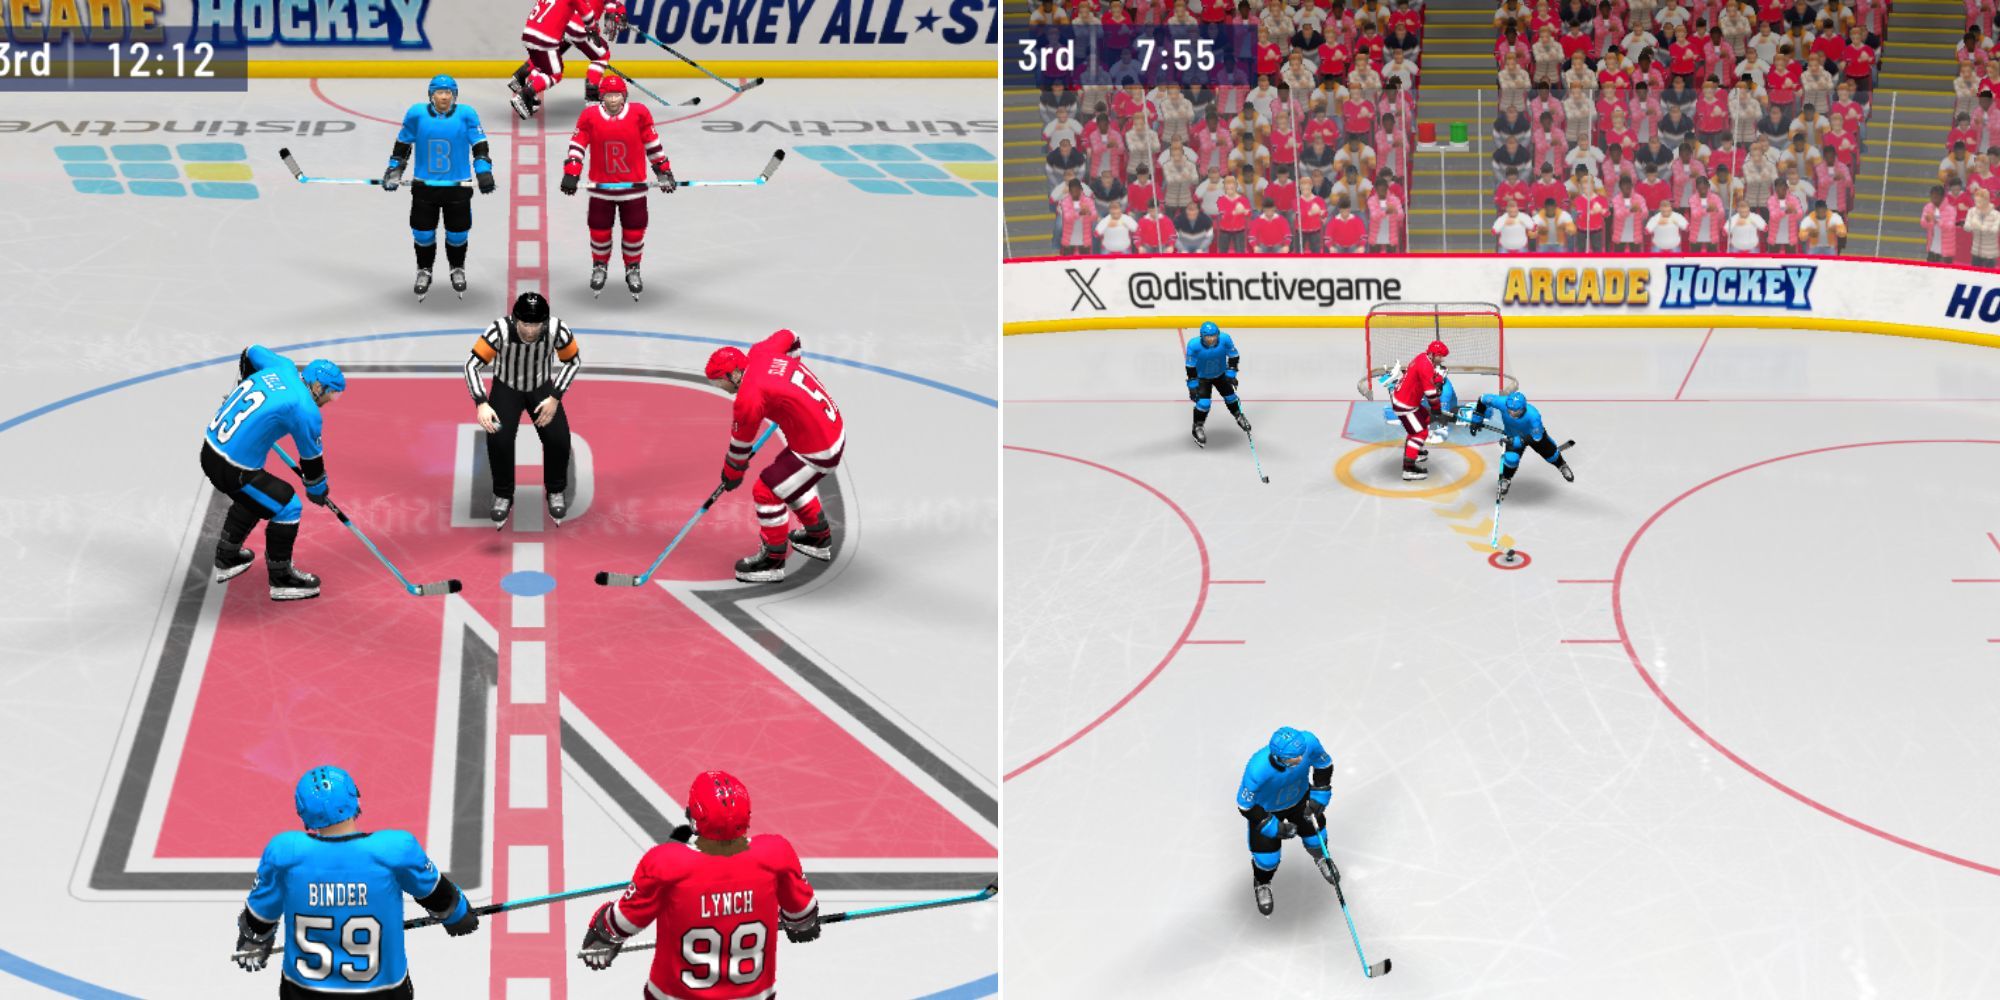 The start of the game and an attempt to score in Hockey All Stars 24